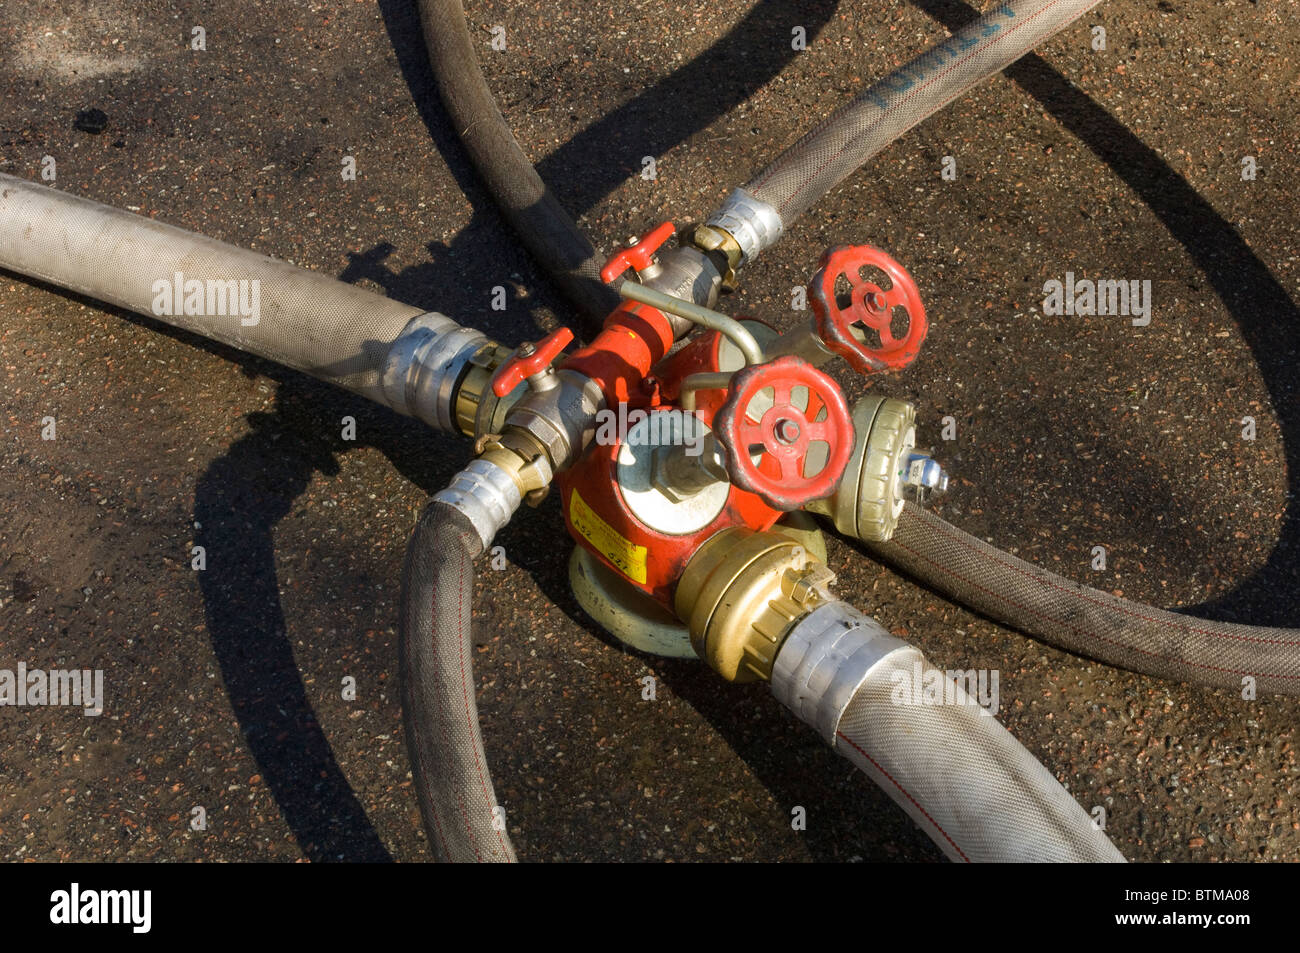 Water hoses at the fire Stock Photo: 32409000 - Alamy